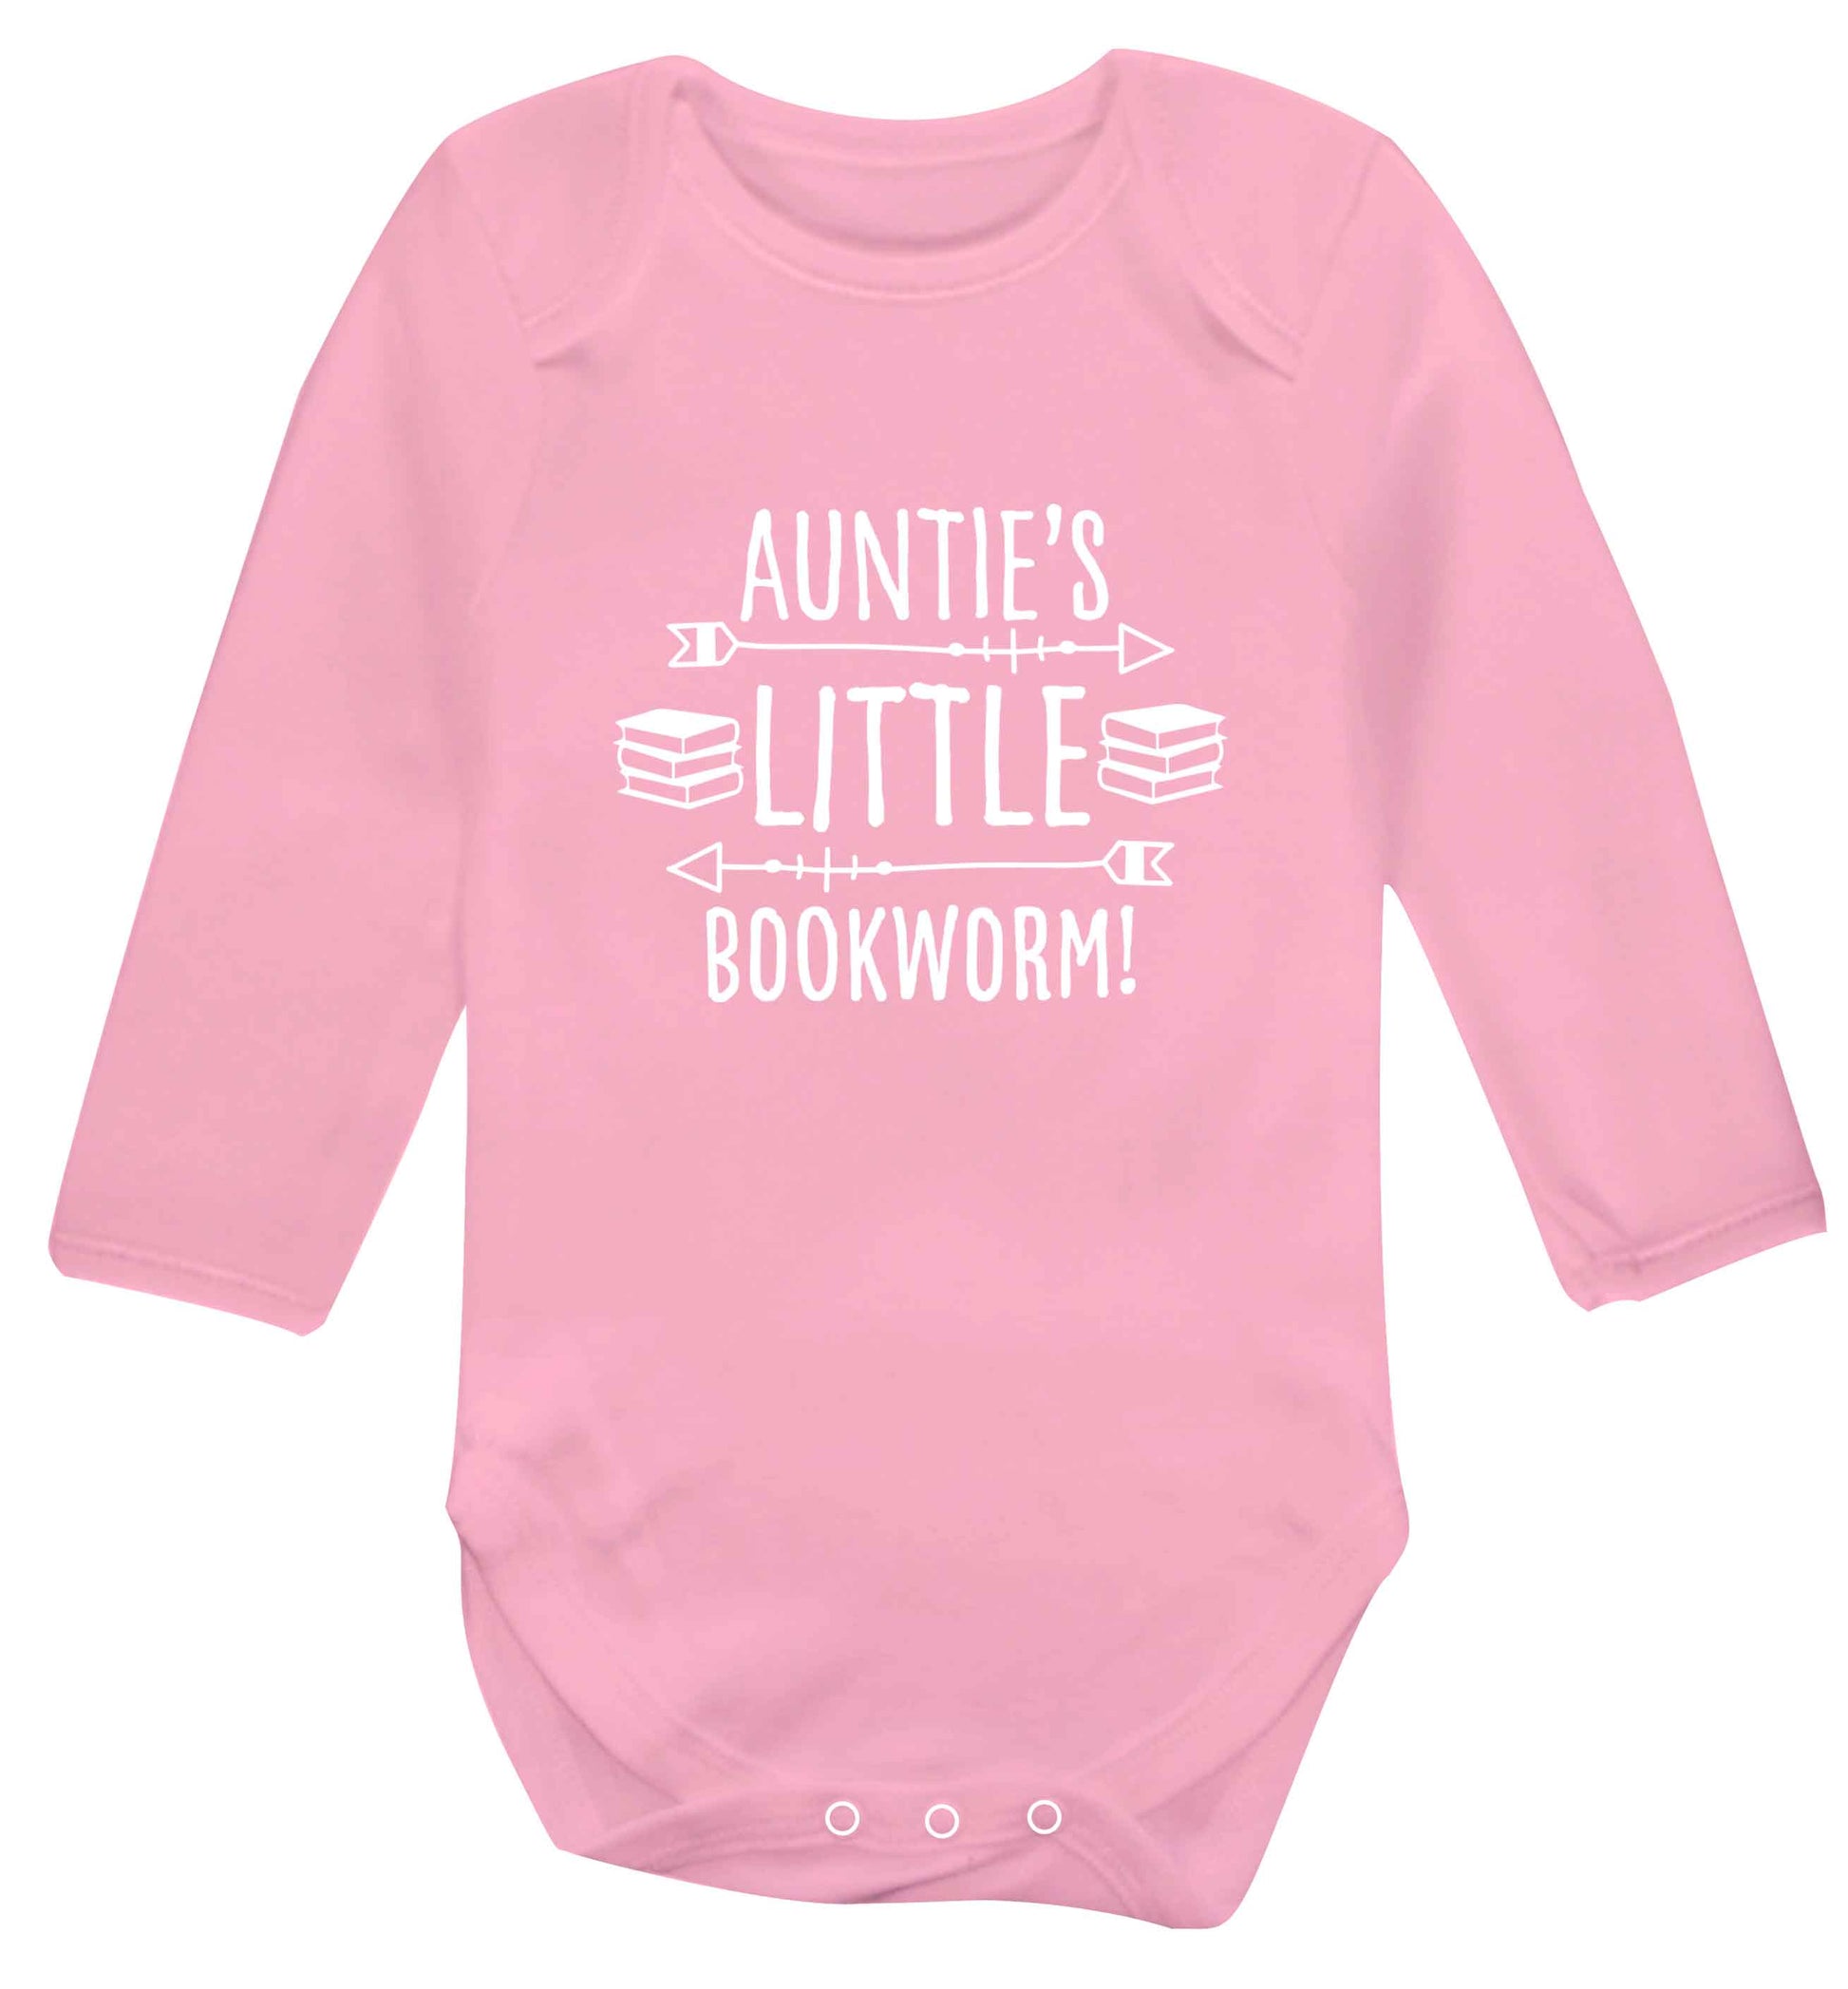 Auntie's little bookworm baby vest long sleeved pale pink 6-12 months